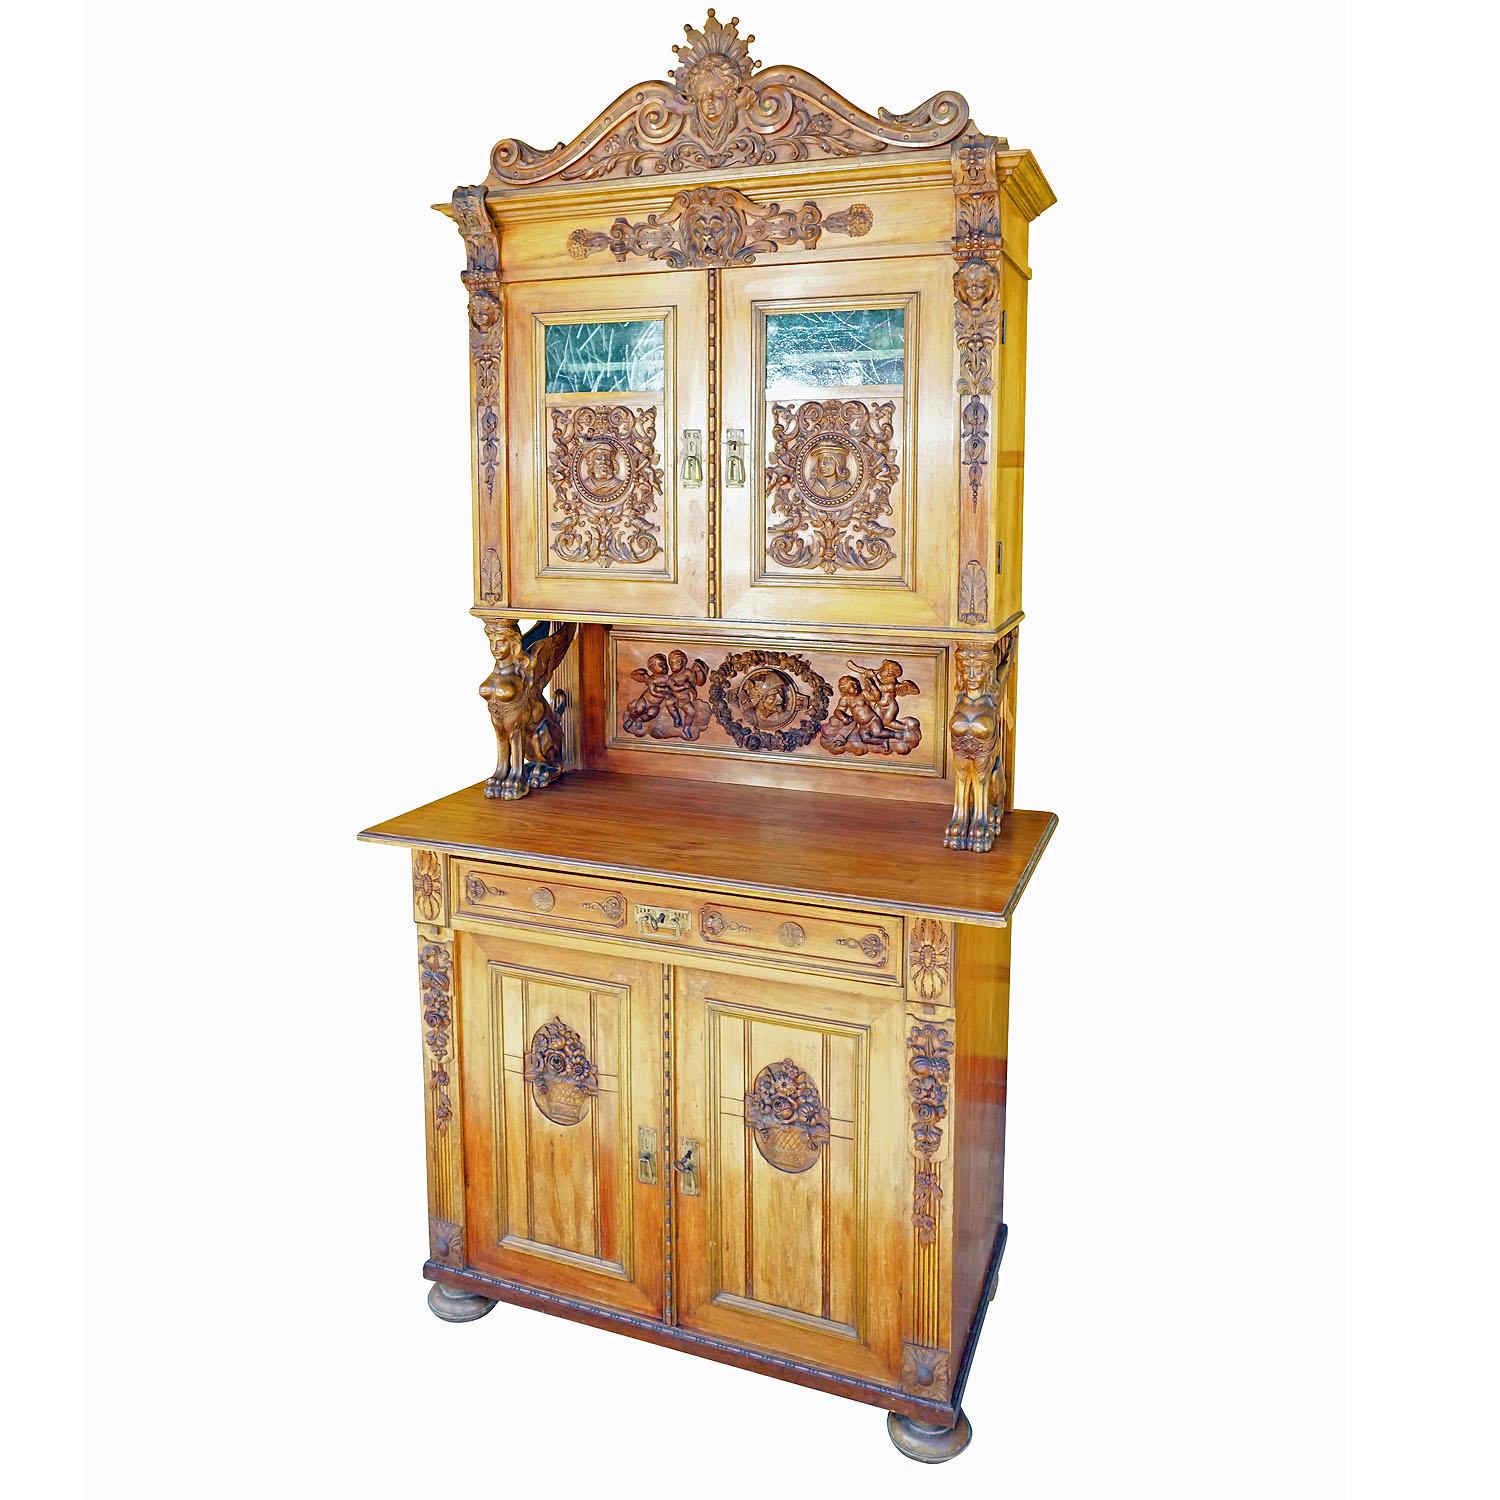 Antique Wooden Carved Cupboard with Several Carvings

A detailed handcarved wooden buffet or cupboard with several elaborately carved wooden decorations depicting lion, putties, angels, eagles and gargoiles. Manufactured in Germany ca. 1920.